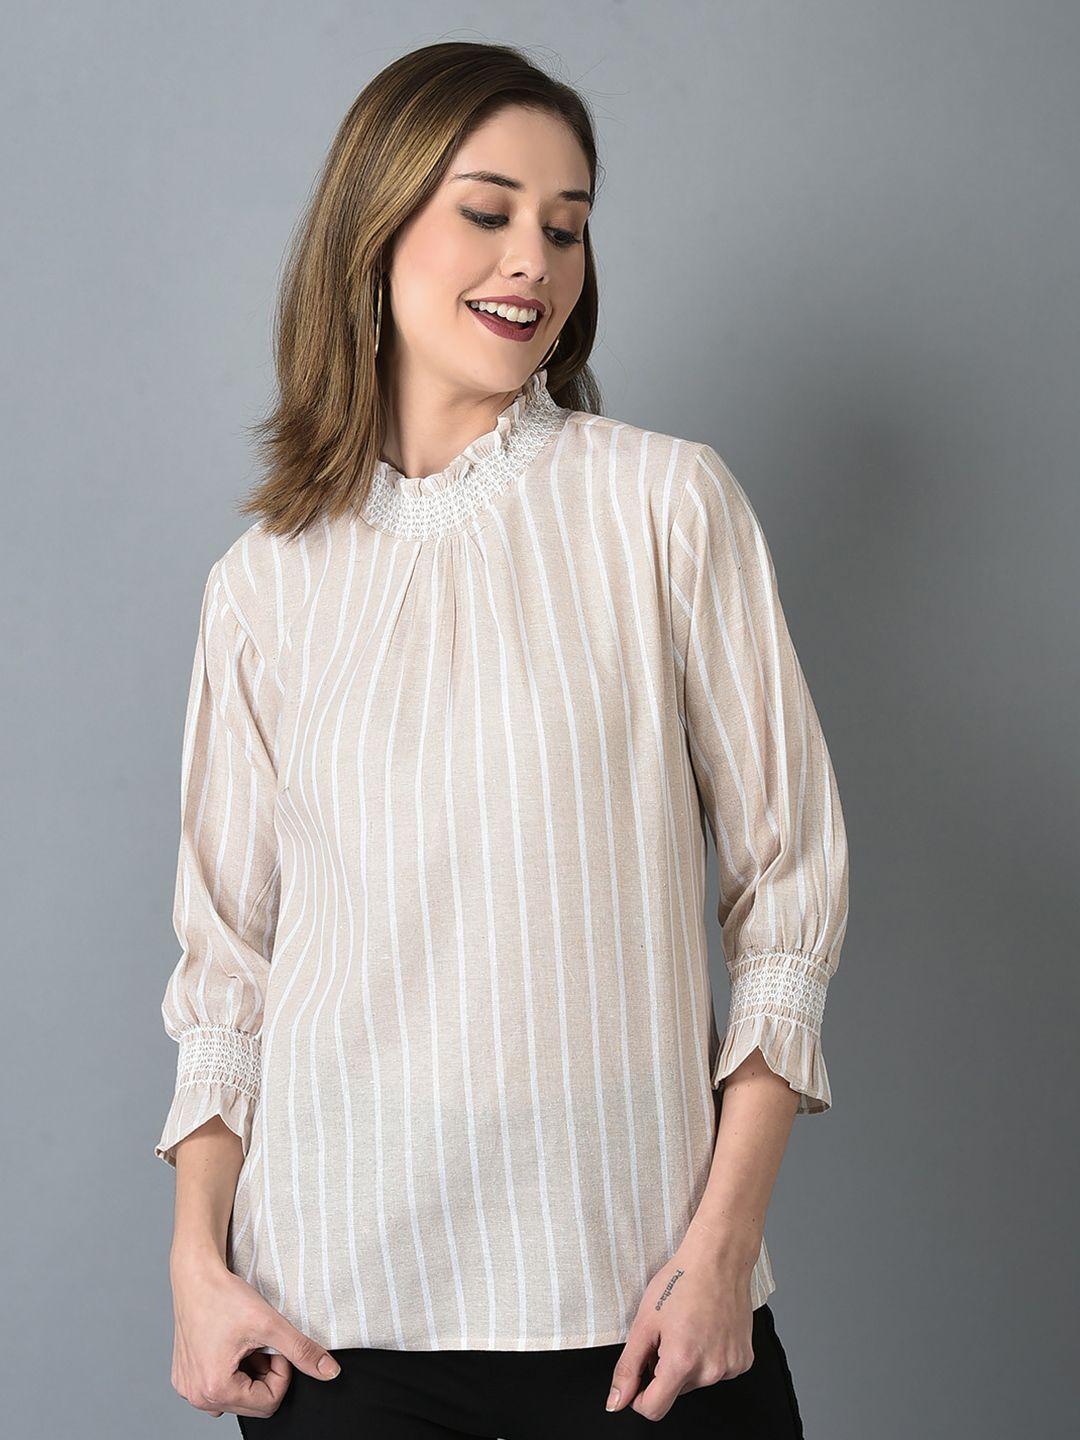 canoe-vertical-striped-high-neck-shirt-style-pure-cotton-top